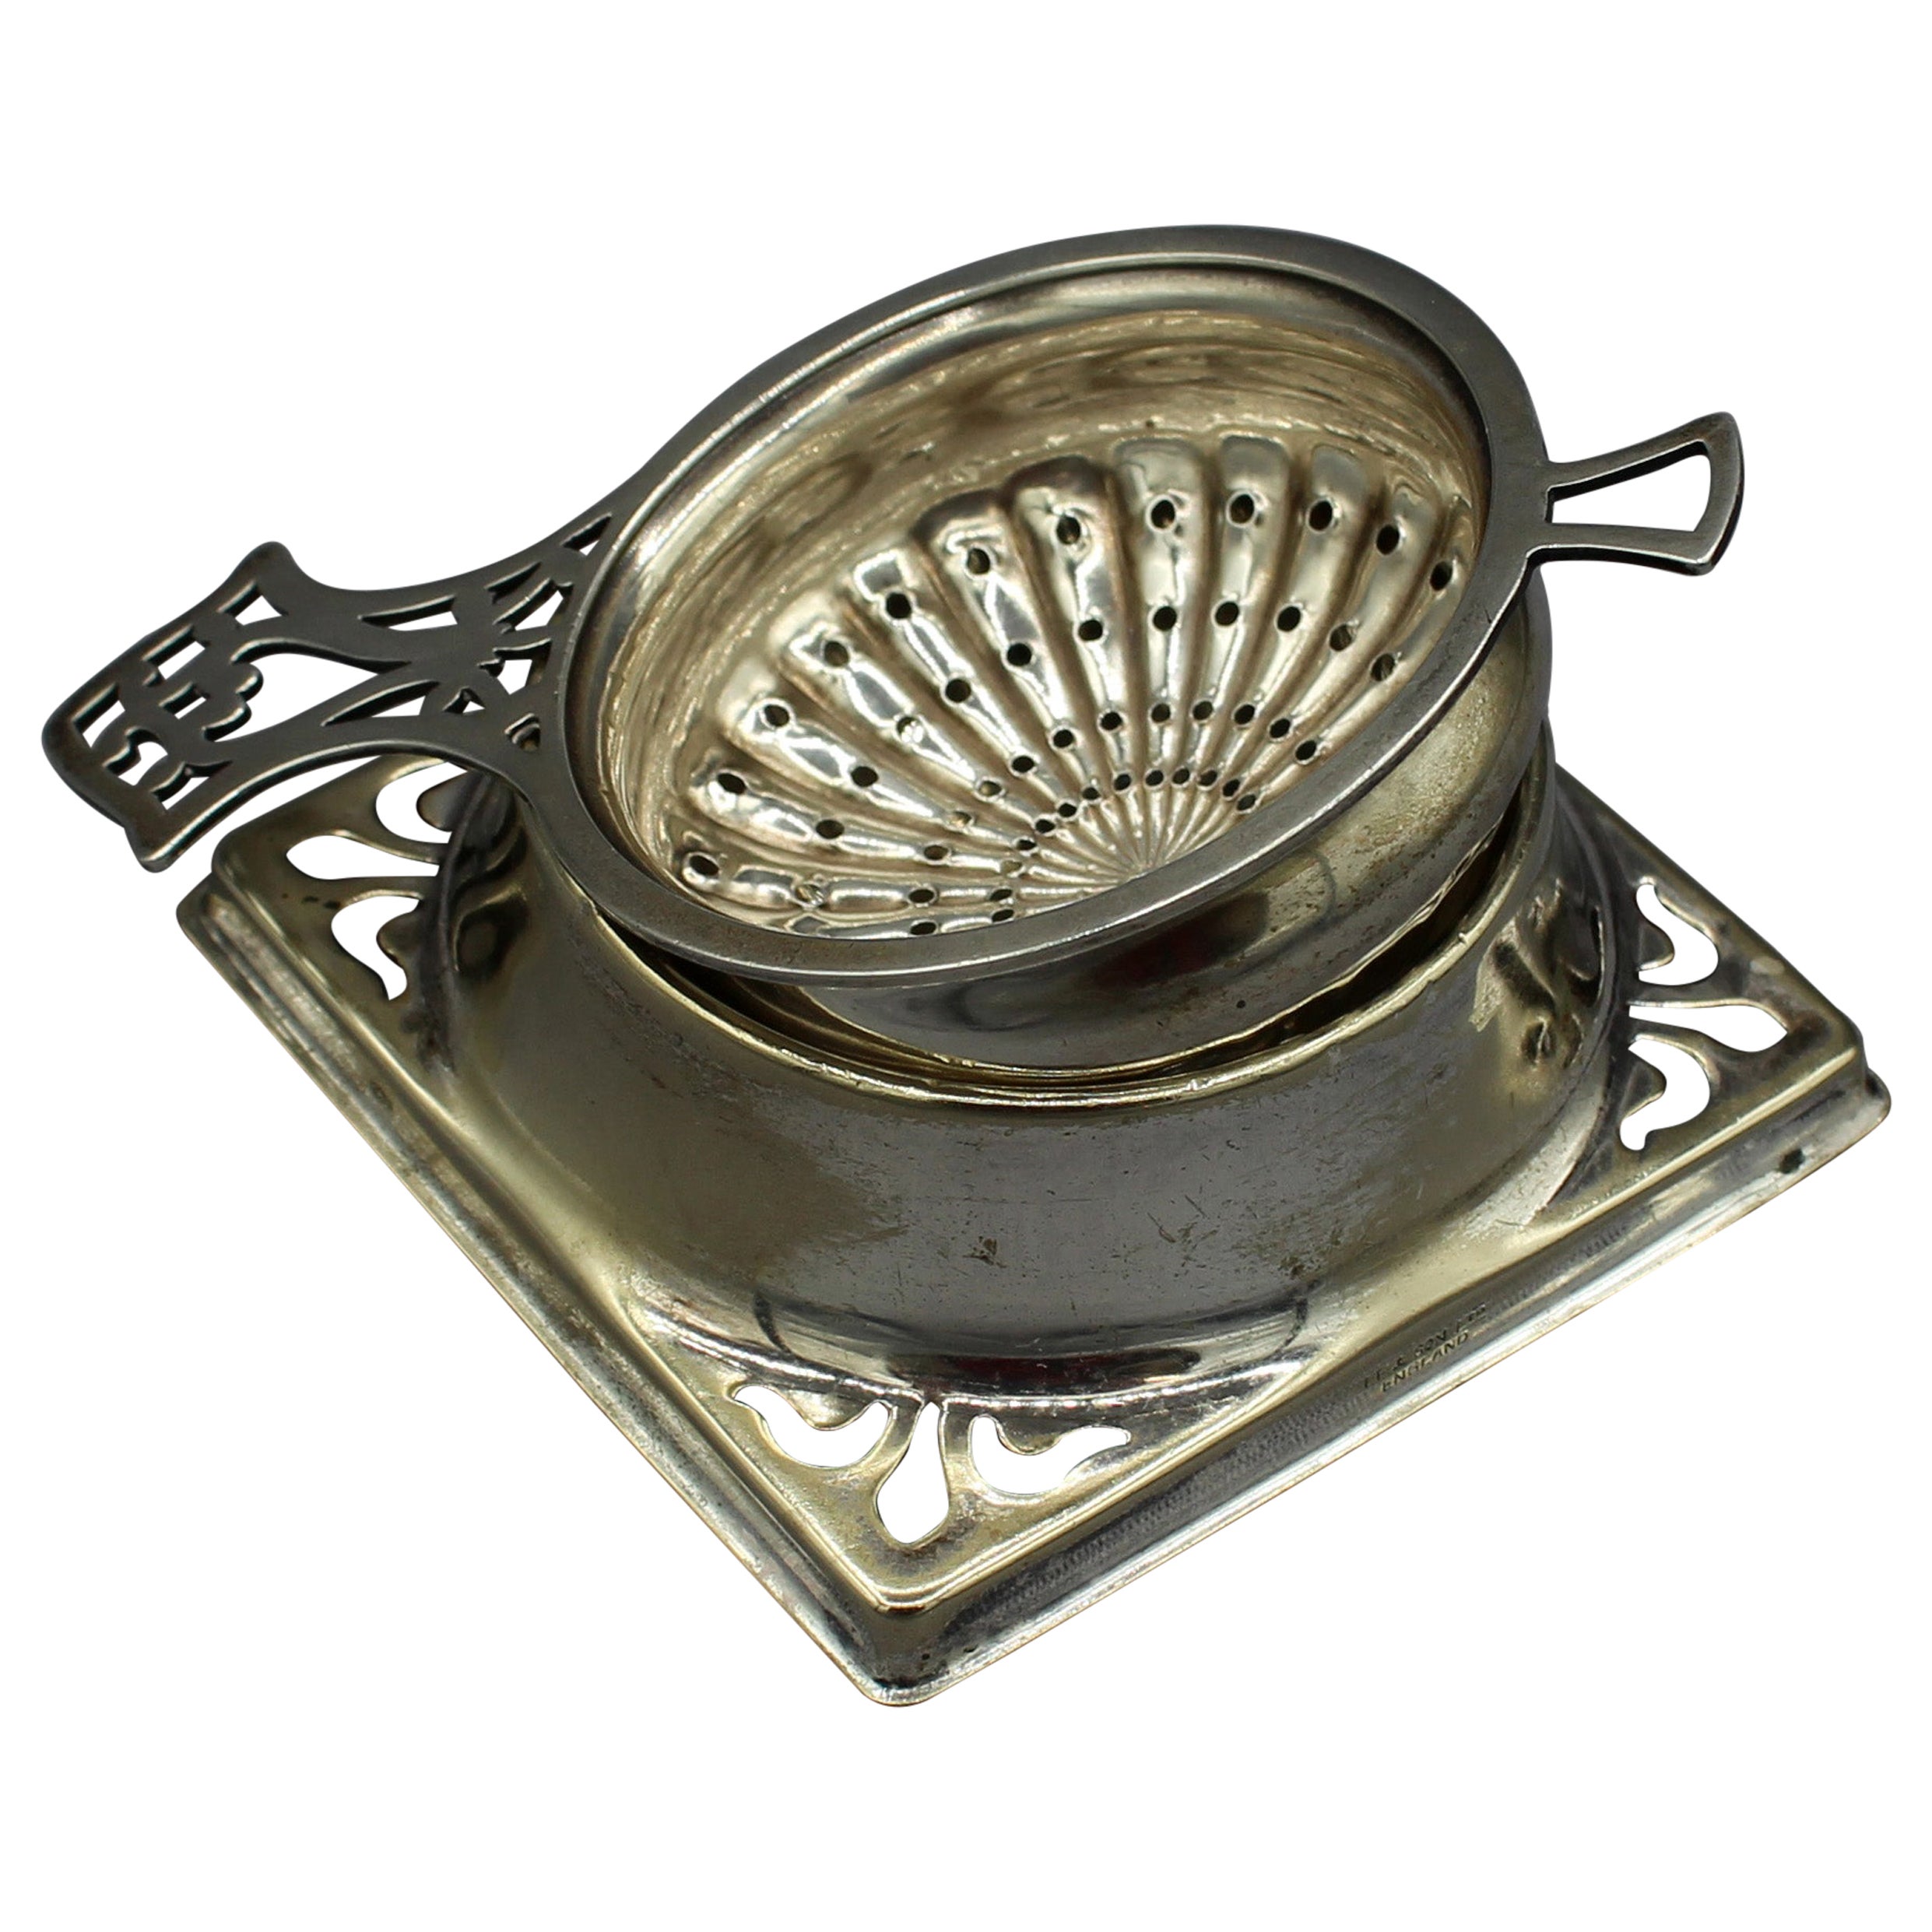 c. 1890-1920 Sterling Tea Strainer with Silver Plated Stand For Sale